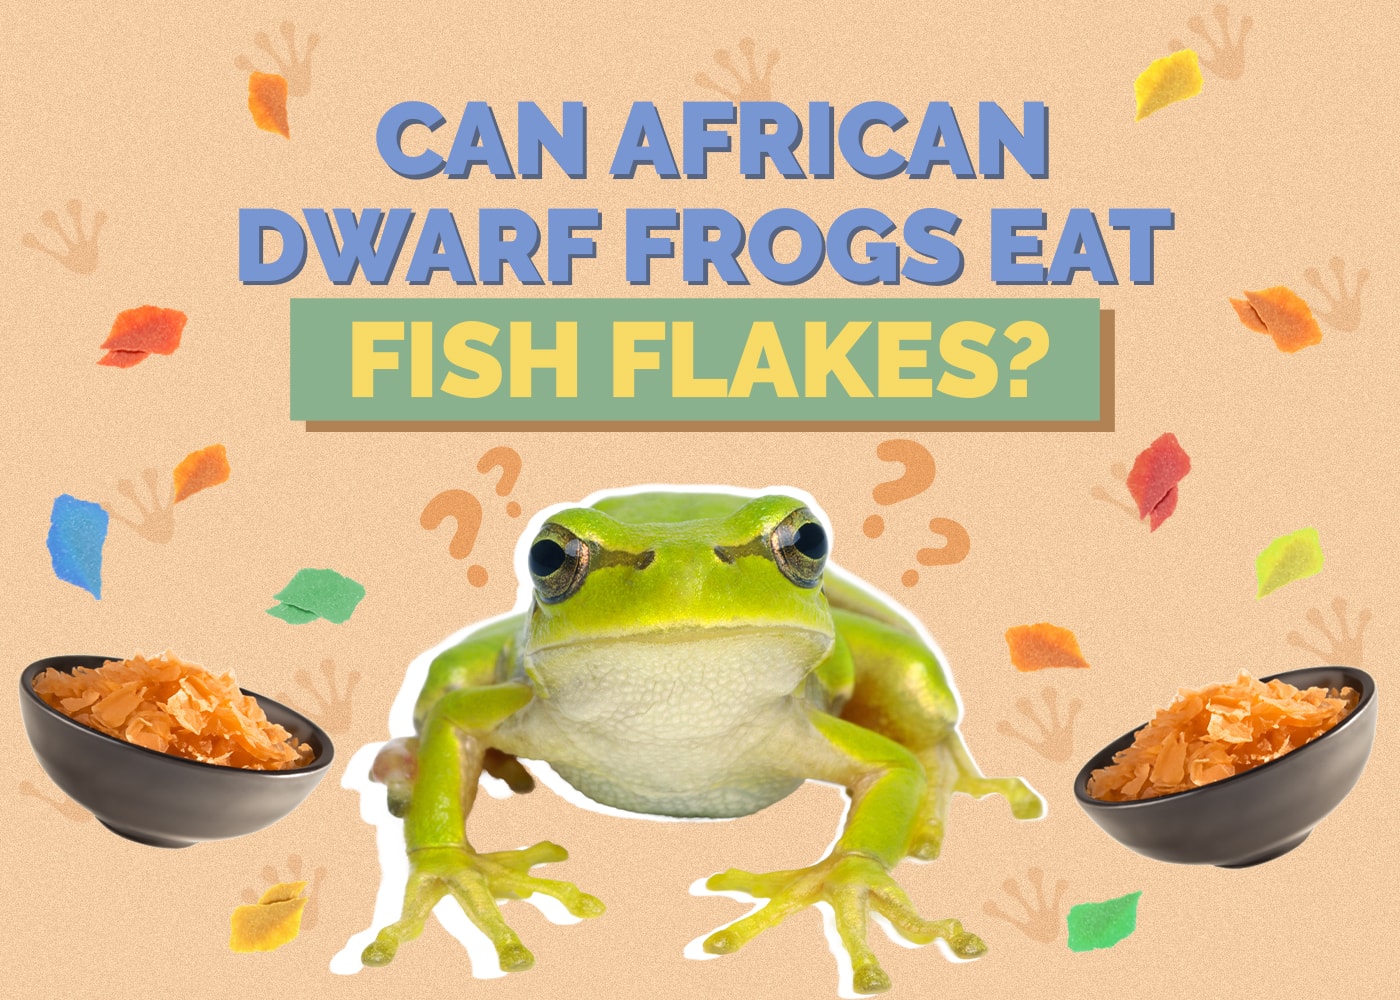 Can African Dwarf Frogs Eat Fish Flakes